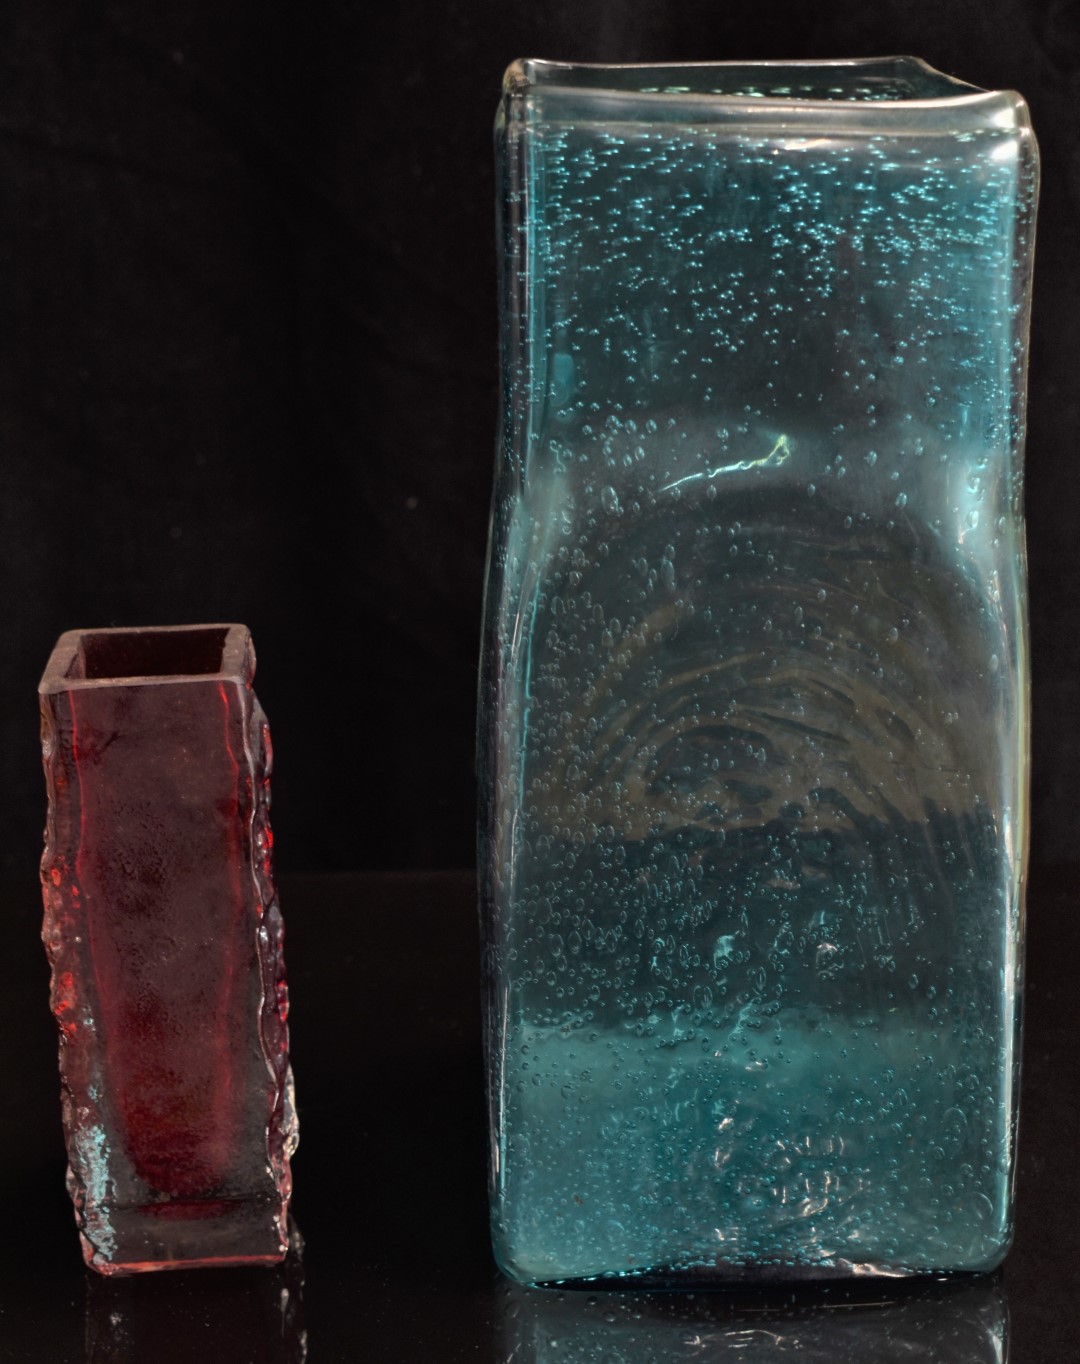 Whitefriars textured bark coffin vase in red together with a Whitefriars style vase in kingfisher - Image 2 of 2